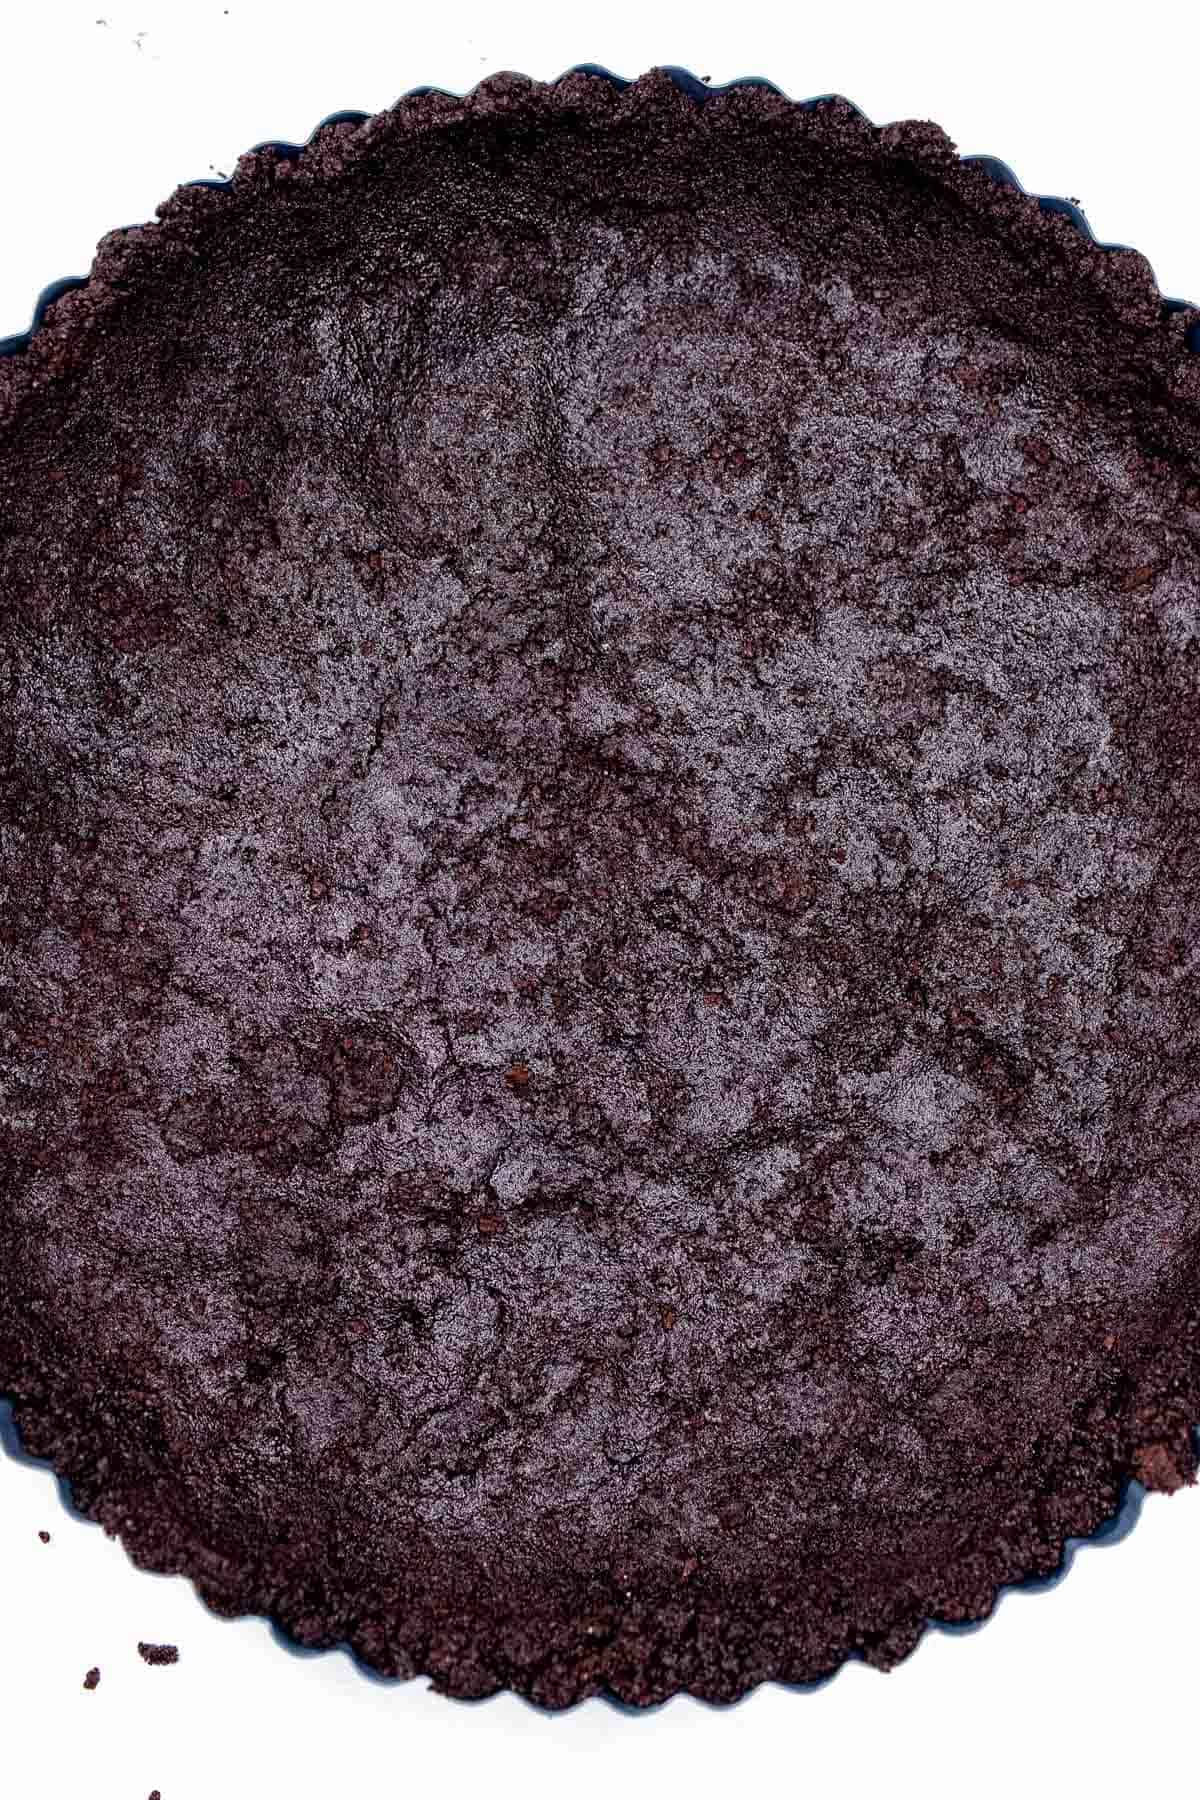 Oreo cookie crust pressed into a 9-inch tart pan.